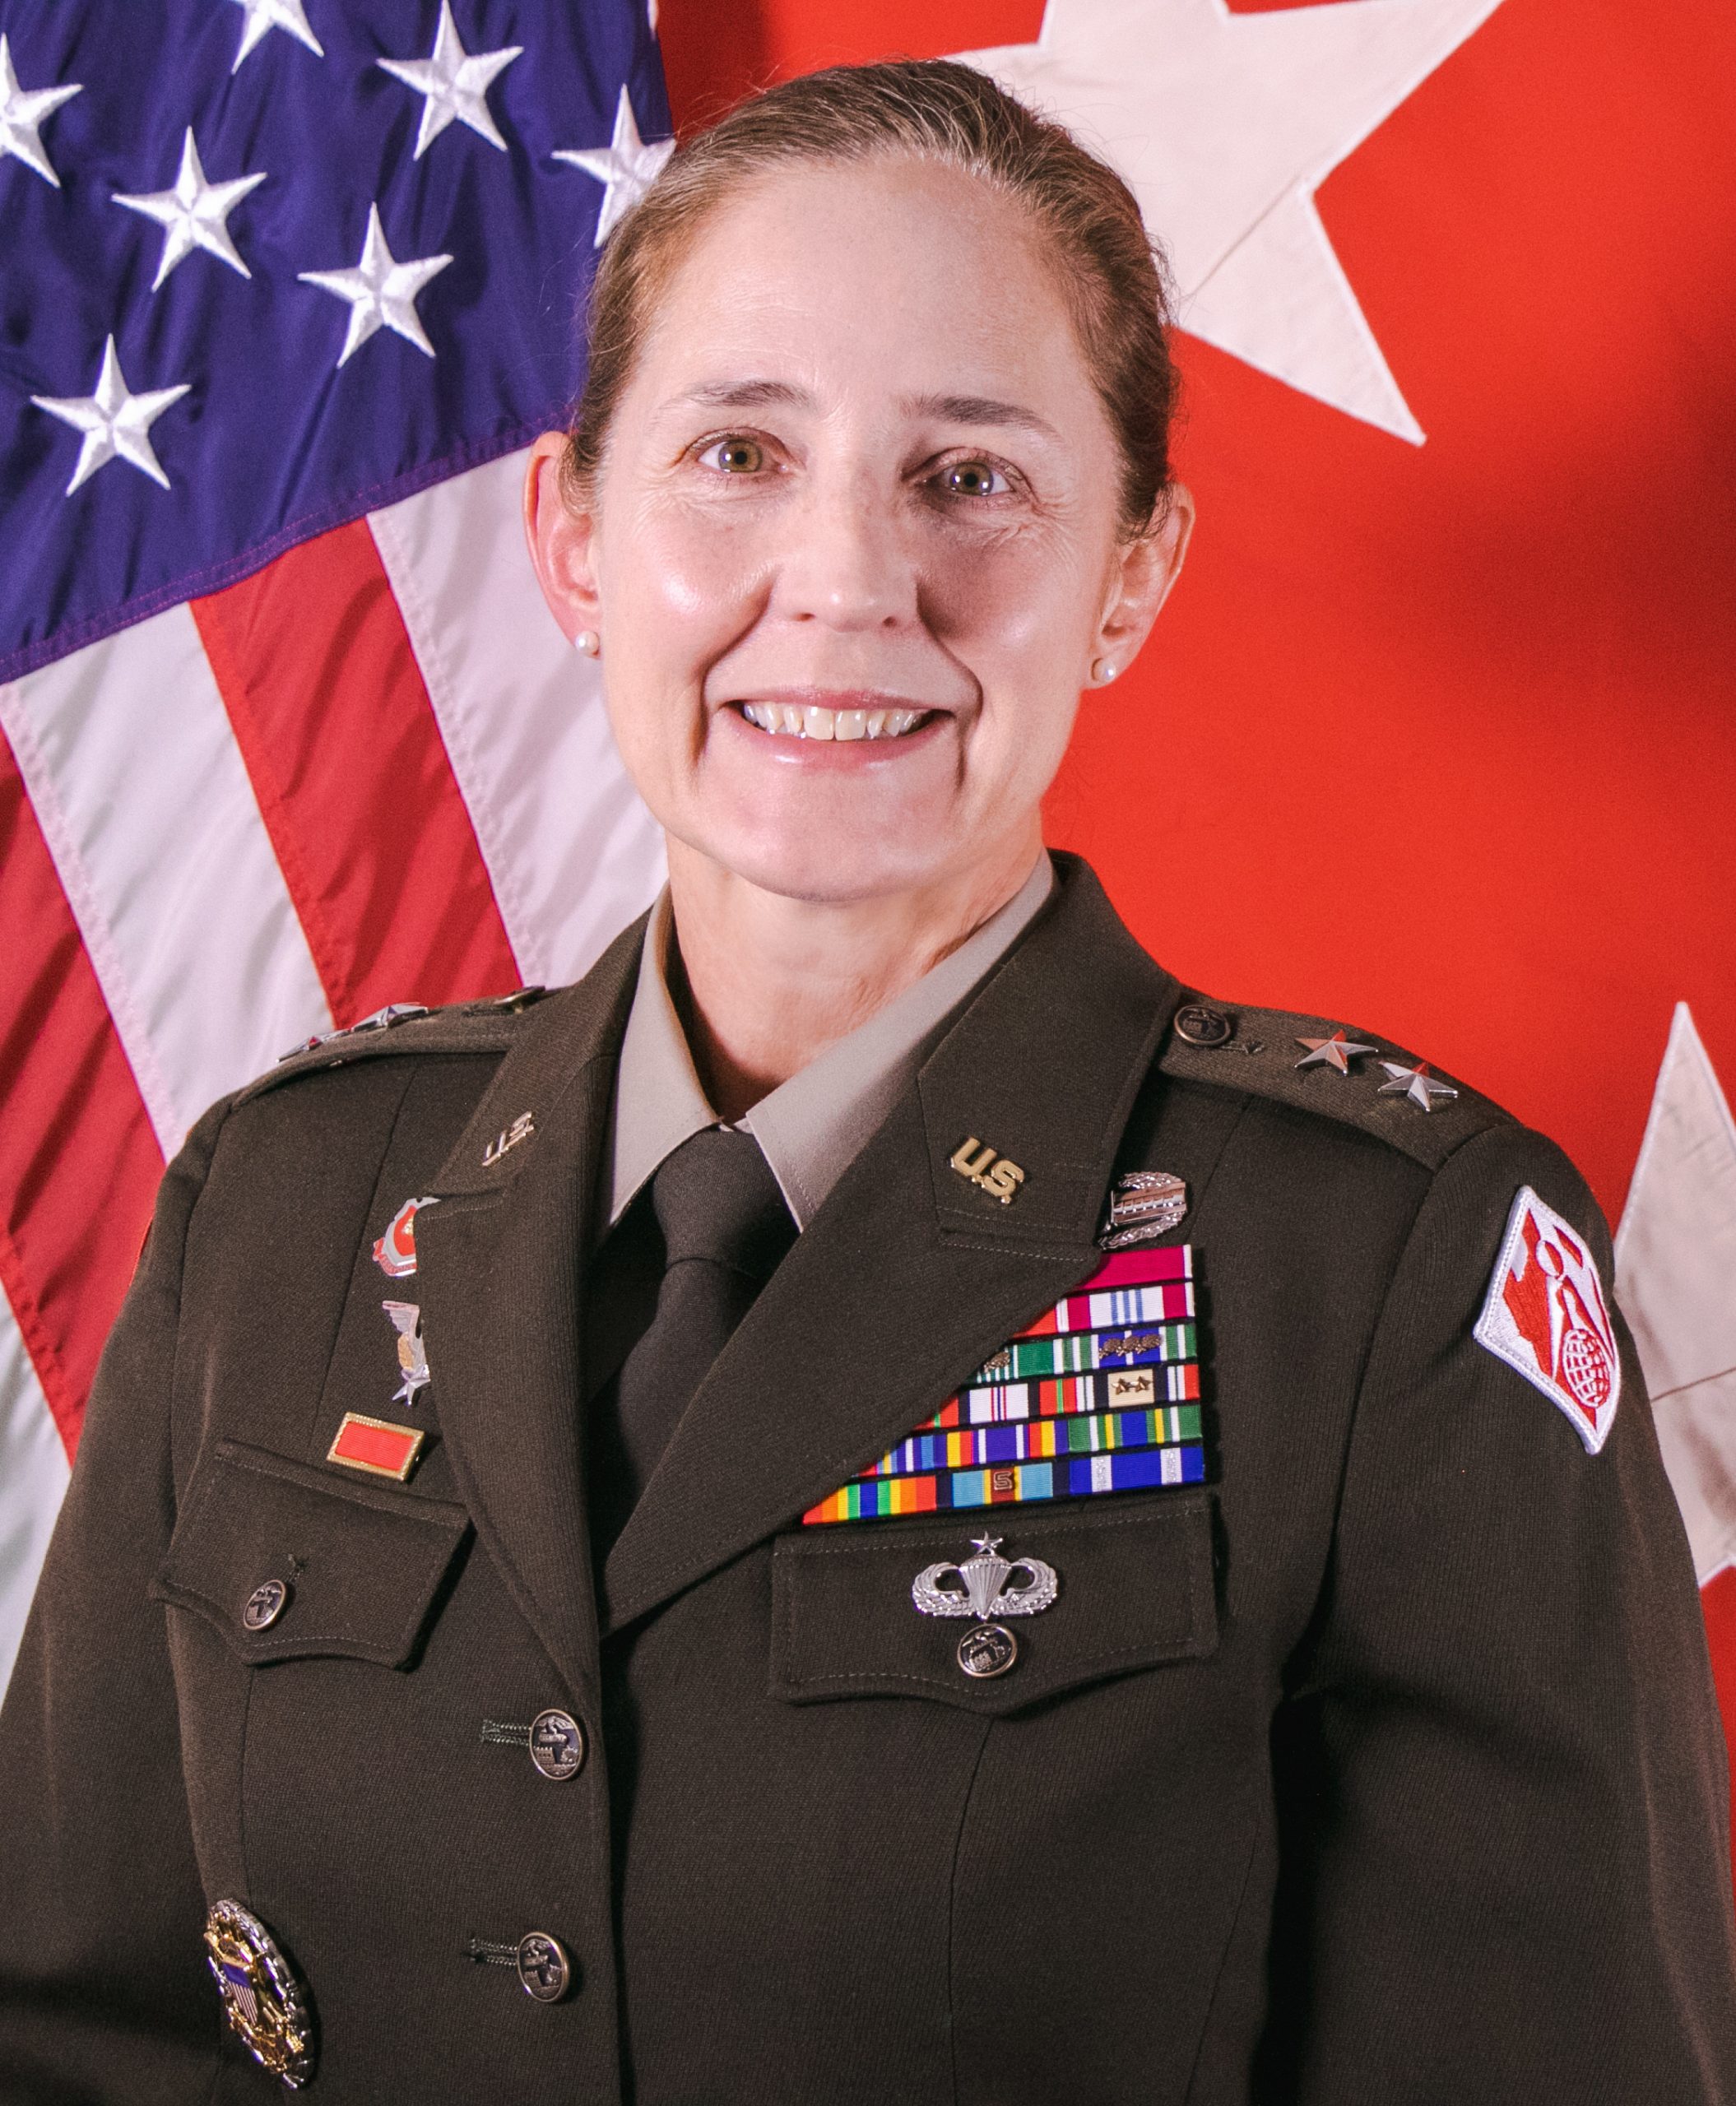 Colonel Kimberly Coloton, the 60th District Commander of Army Corps of Engineers, Los Angeles District, serving from 2013 to 2015.